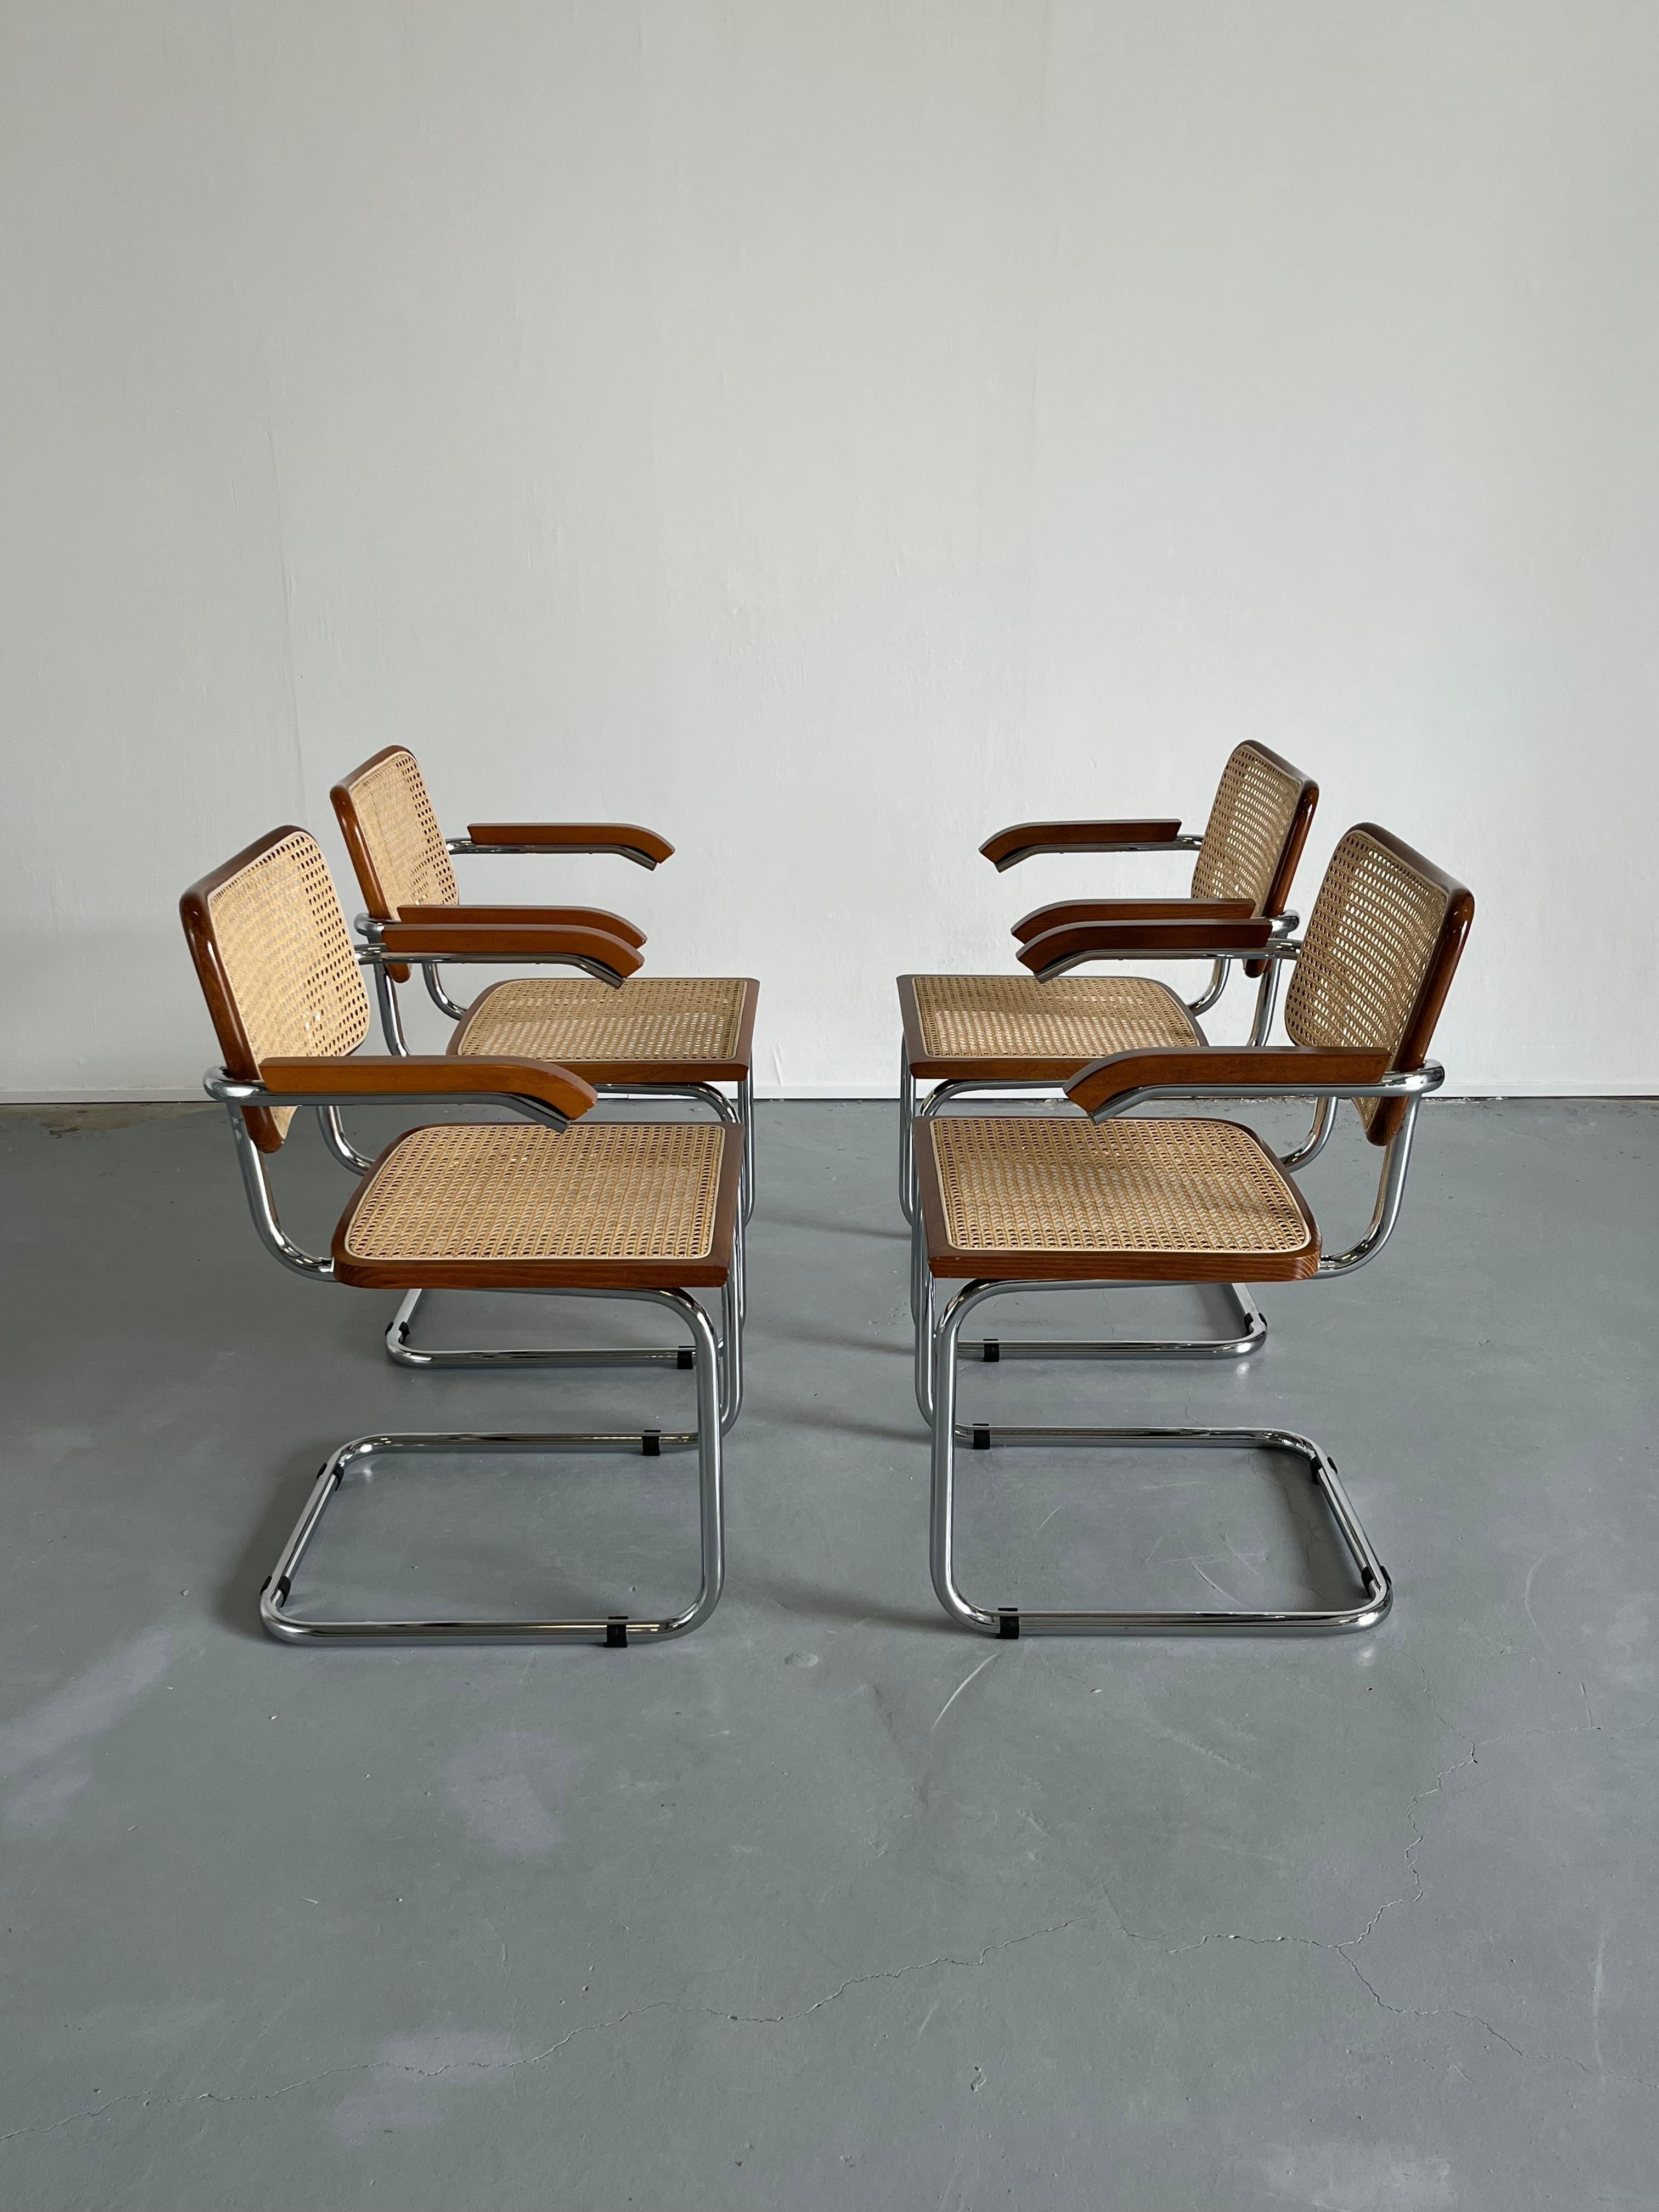 Late 20th Century Set of 4 Vintage Brown Cesca Midcentury Italian Cantilever Chair, Marcel Breuer